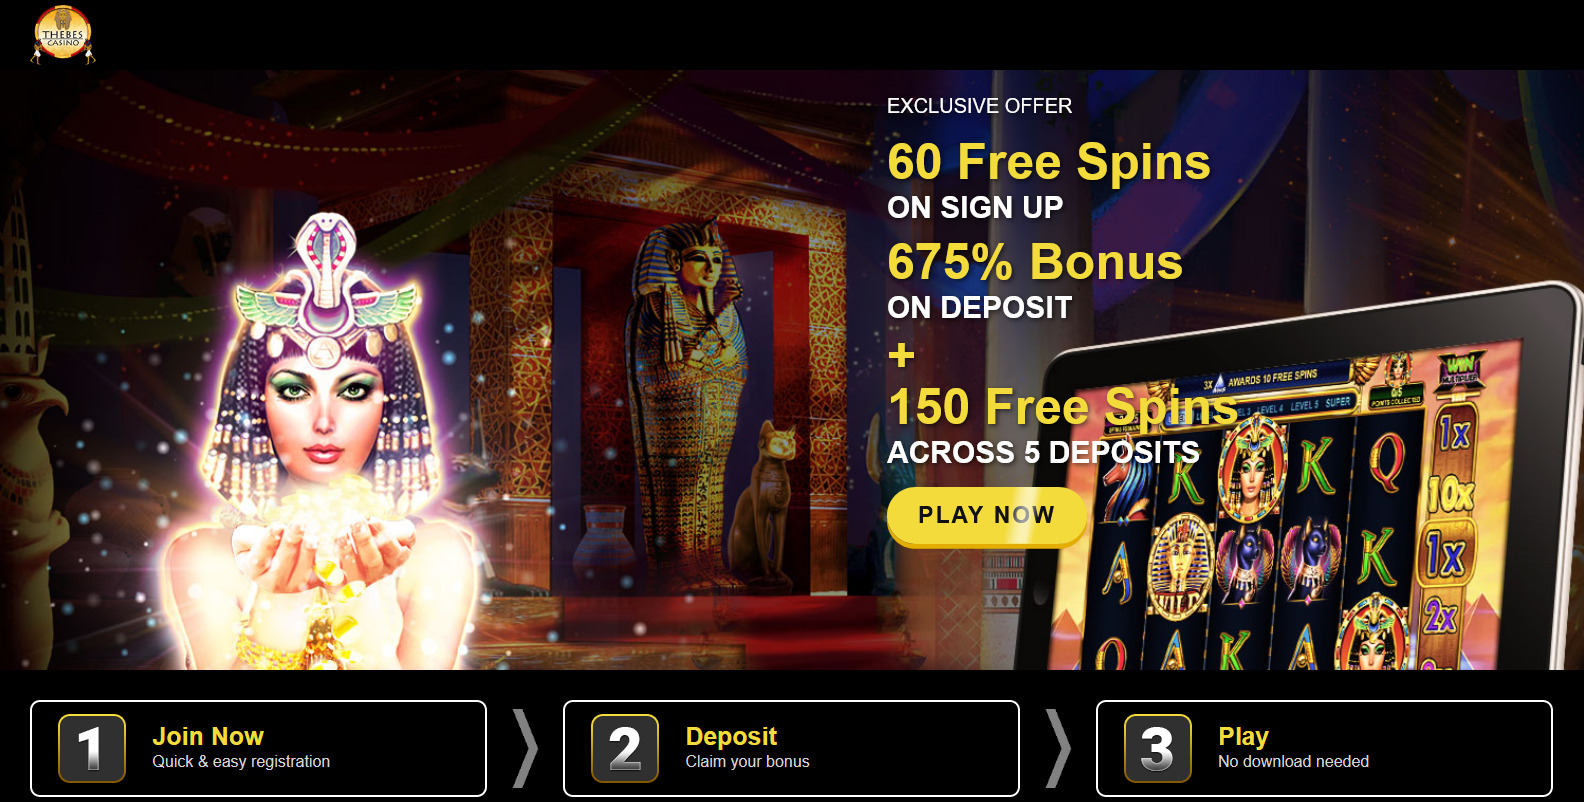 TheBes Casino - Golden Queen - 60 FS on SUP + 675% and 150FS